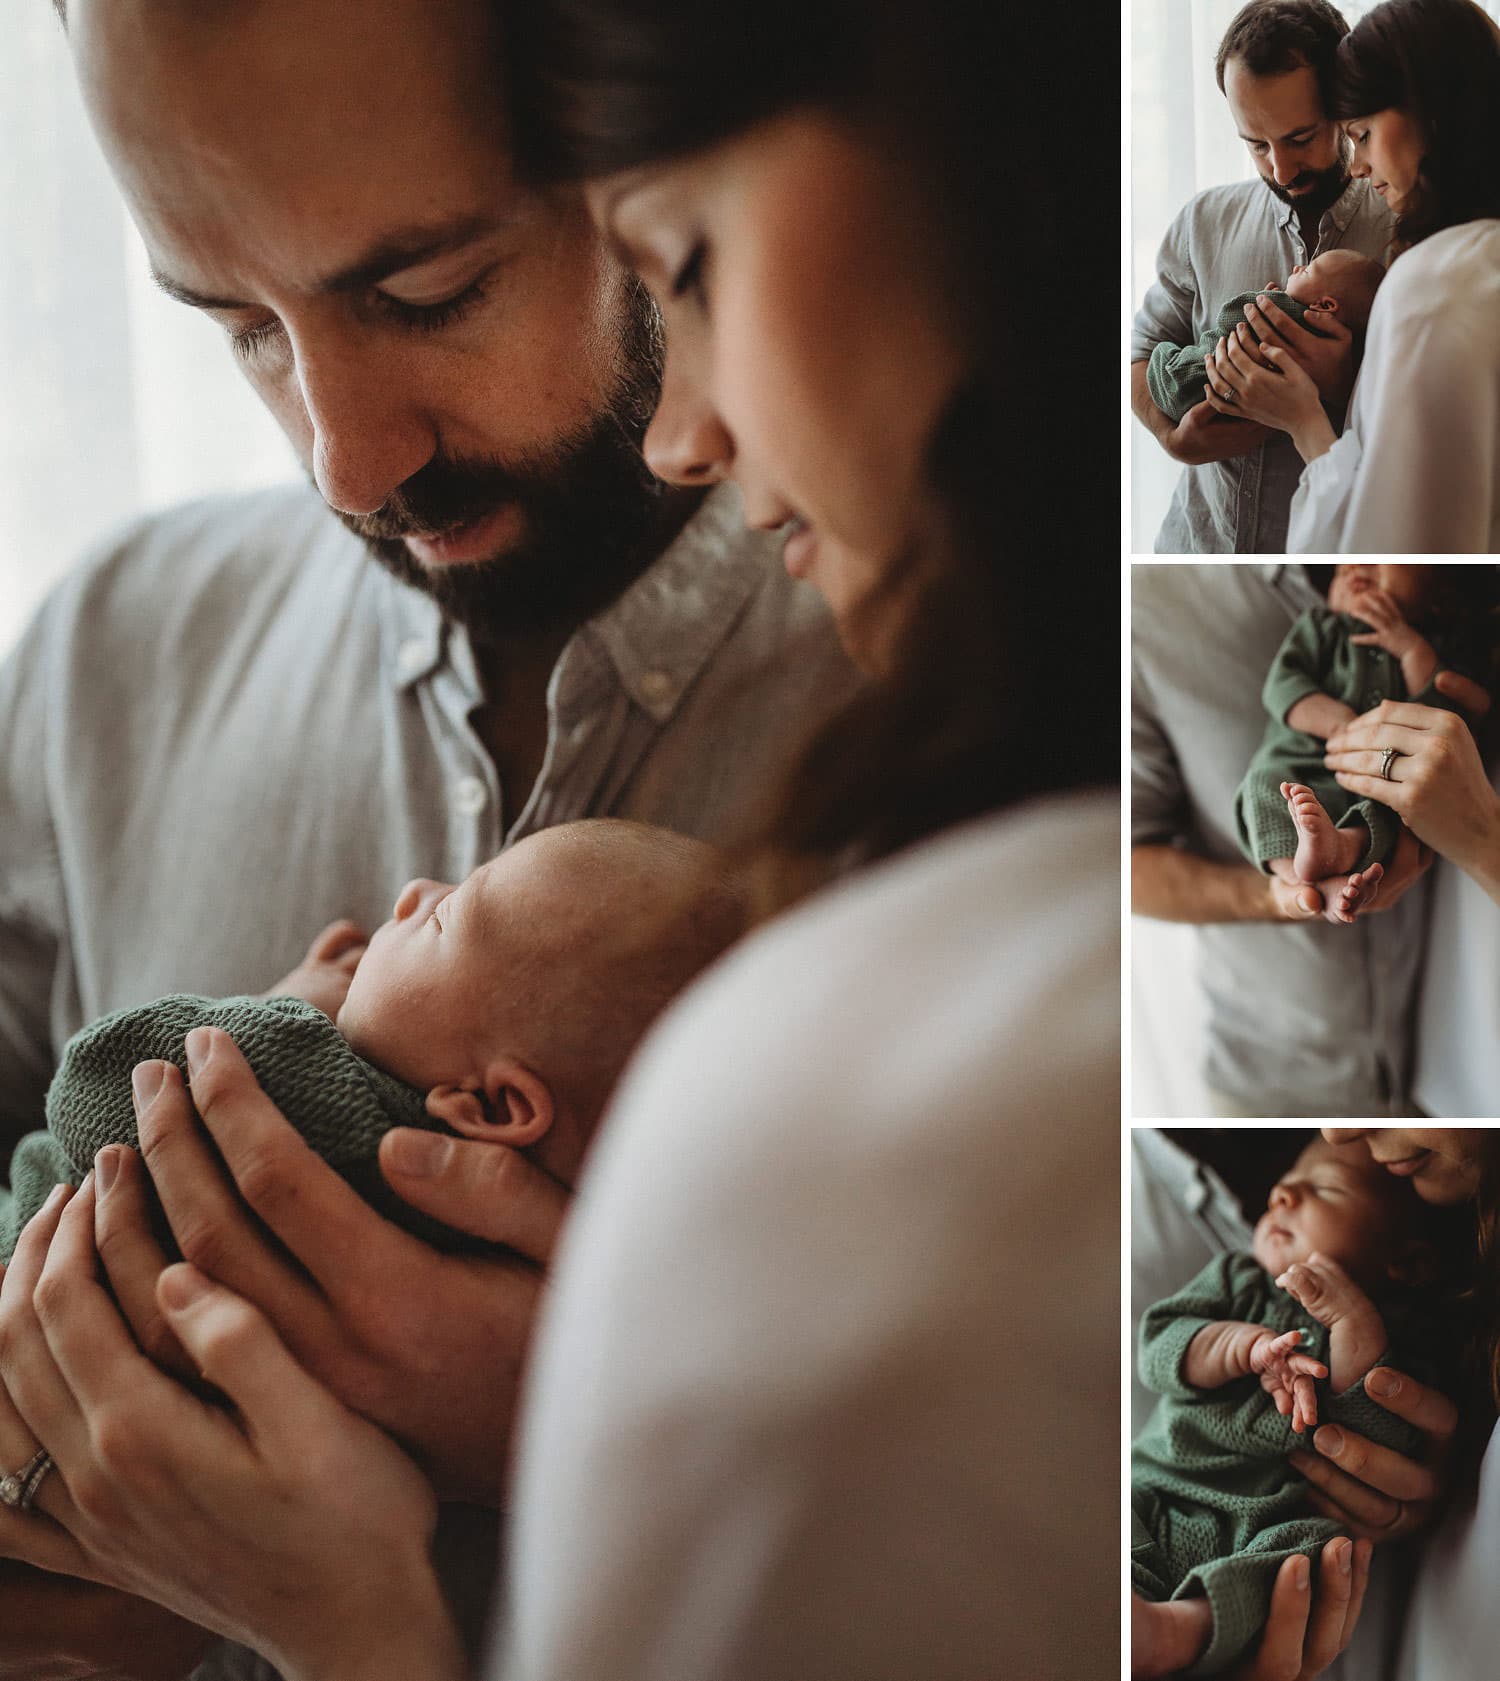 Newborn-photography-intimate-moments-at-home-sydney